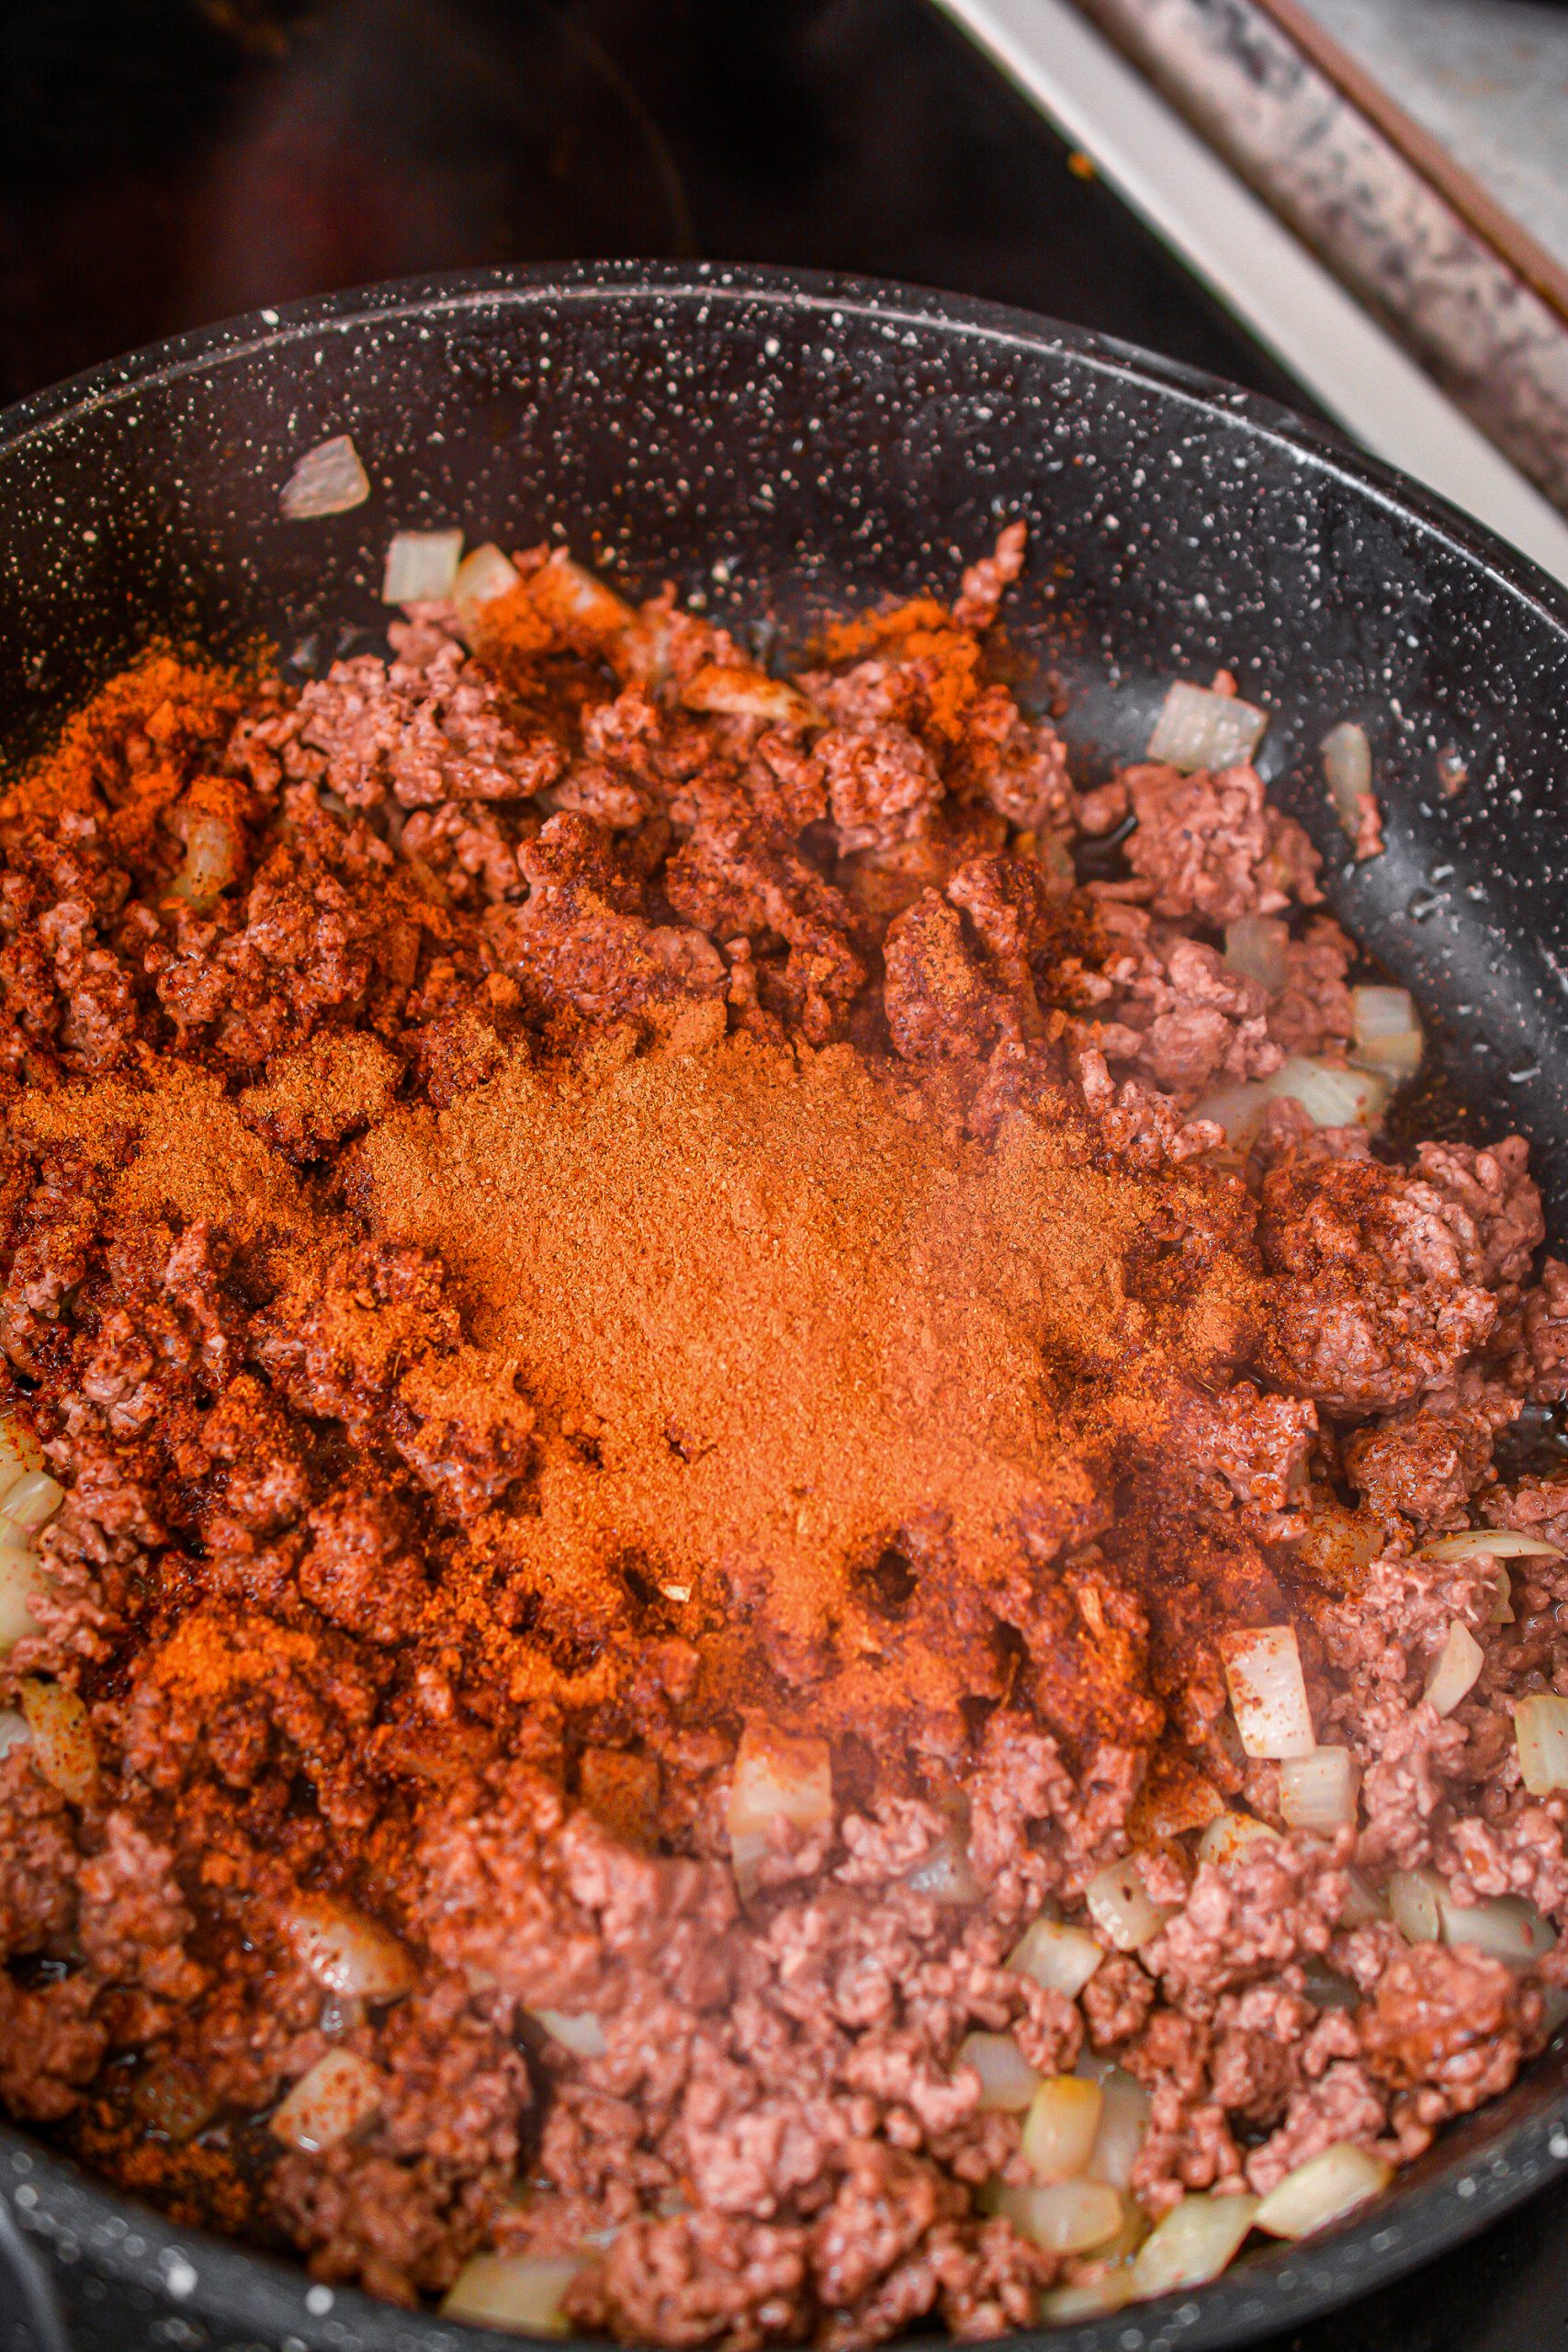 Reduce the heat to low and stir in the taco seasoning. Saute for a few minutes longer.